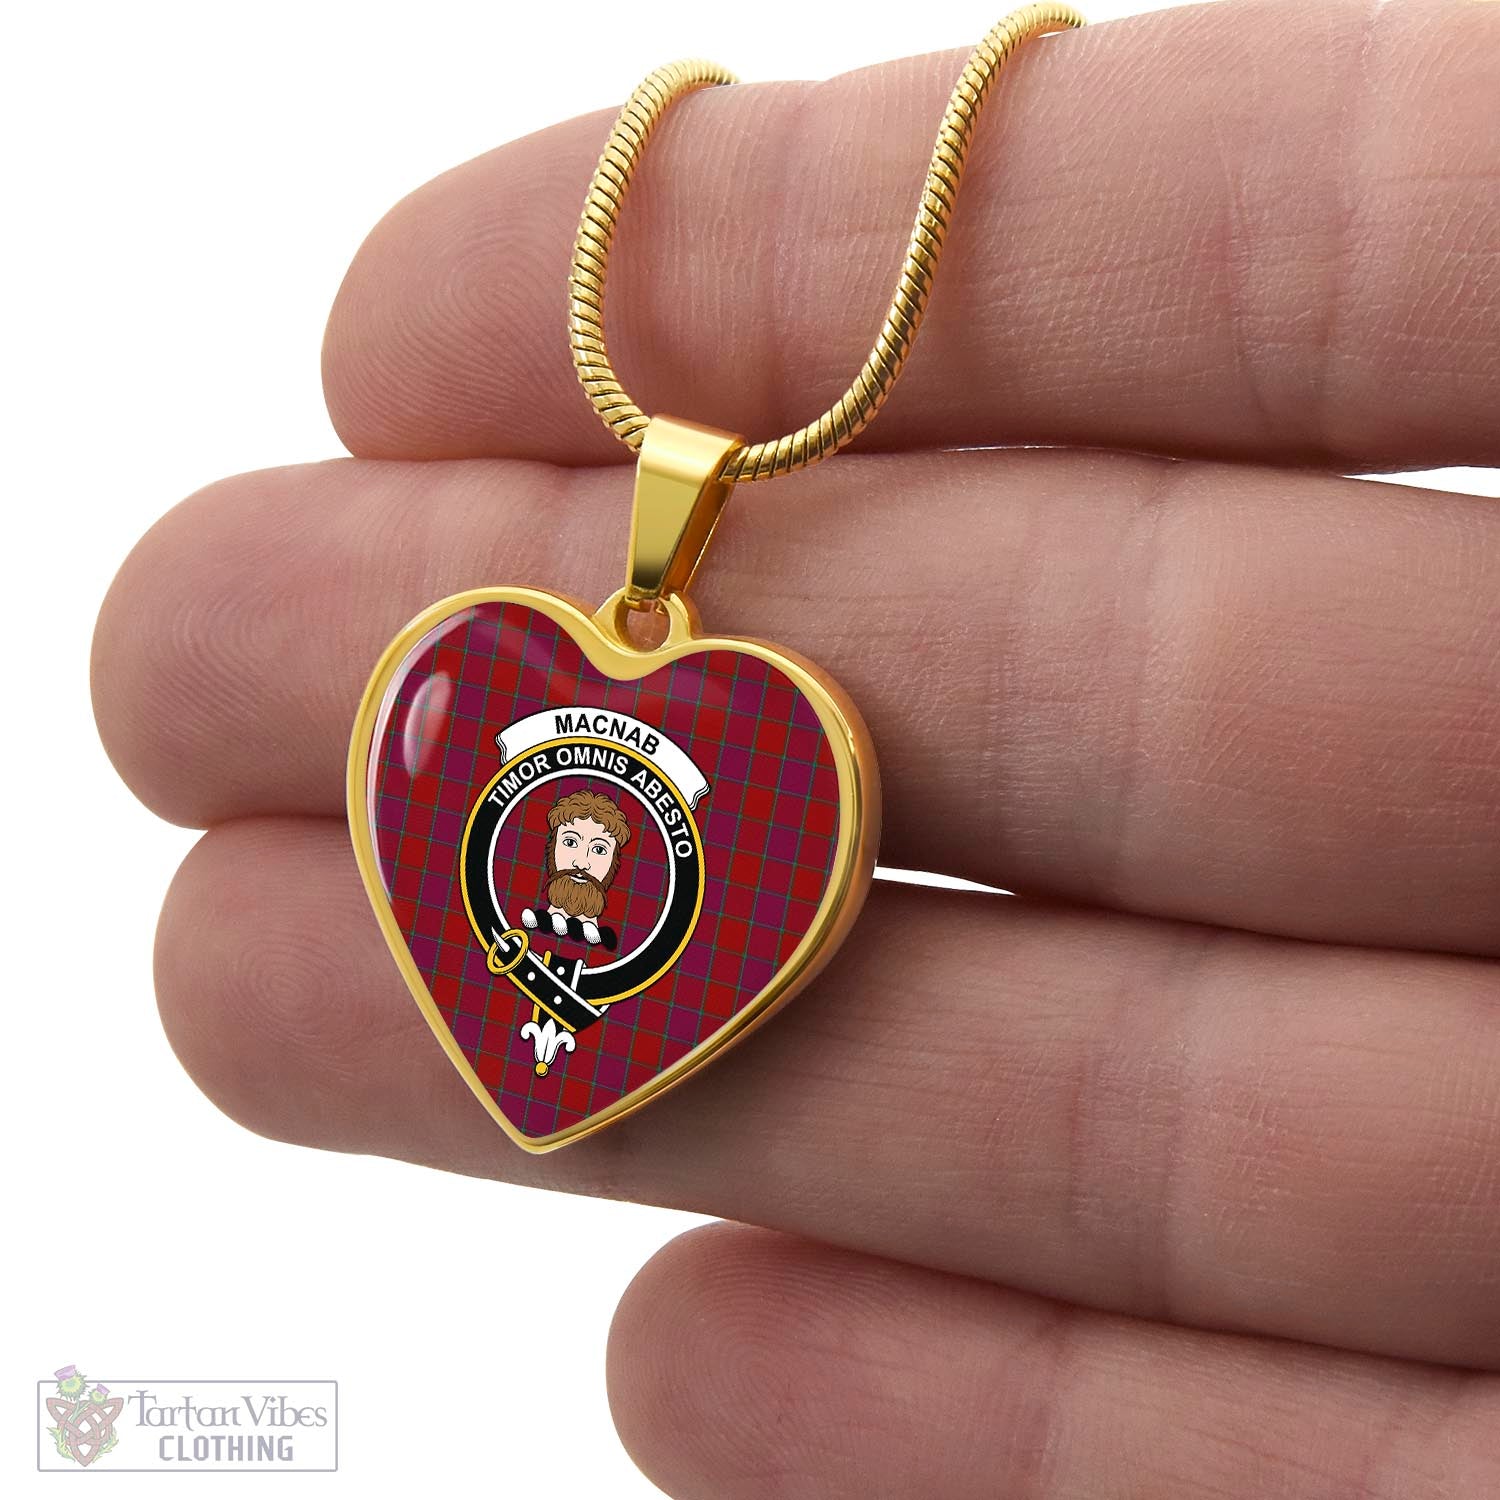 Tartan Vibes Clothing MacNab Old Tartan Heart Necklace with Family Crest